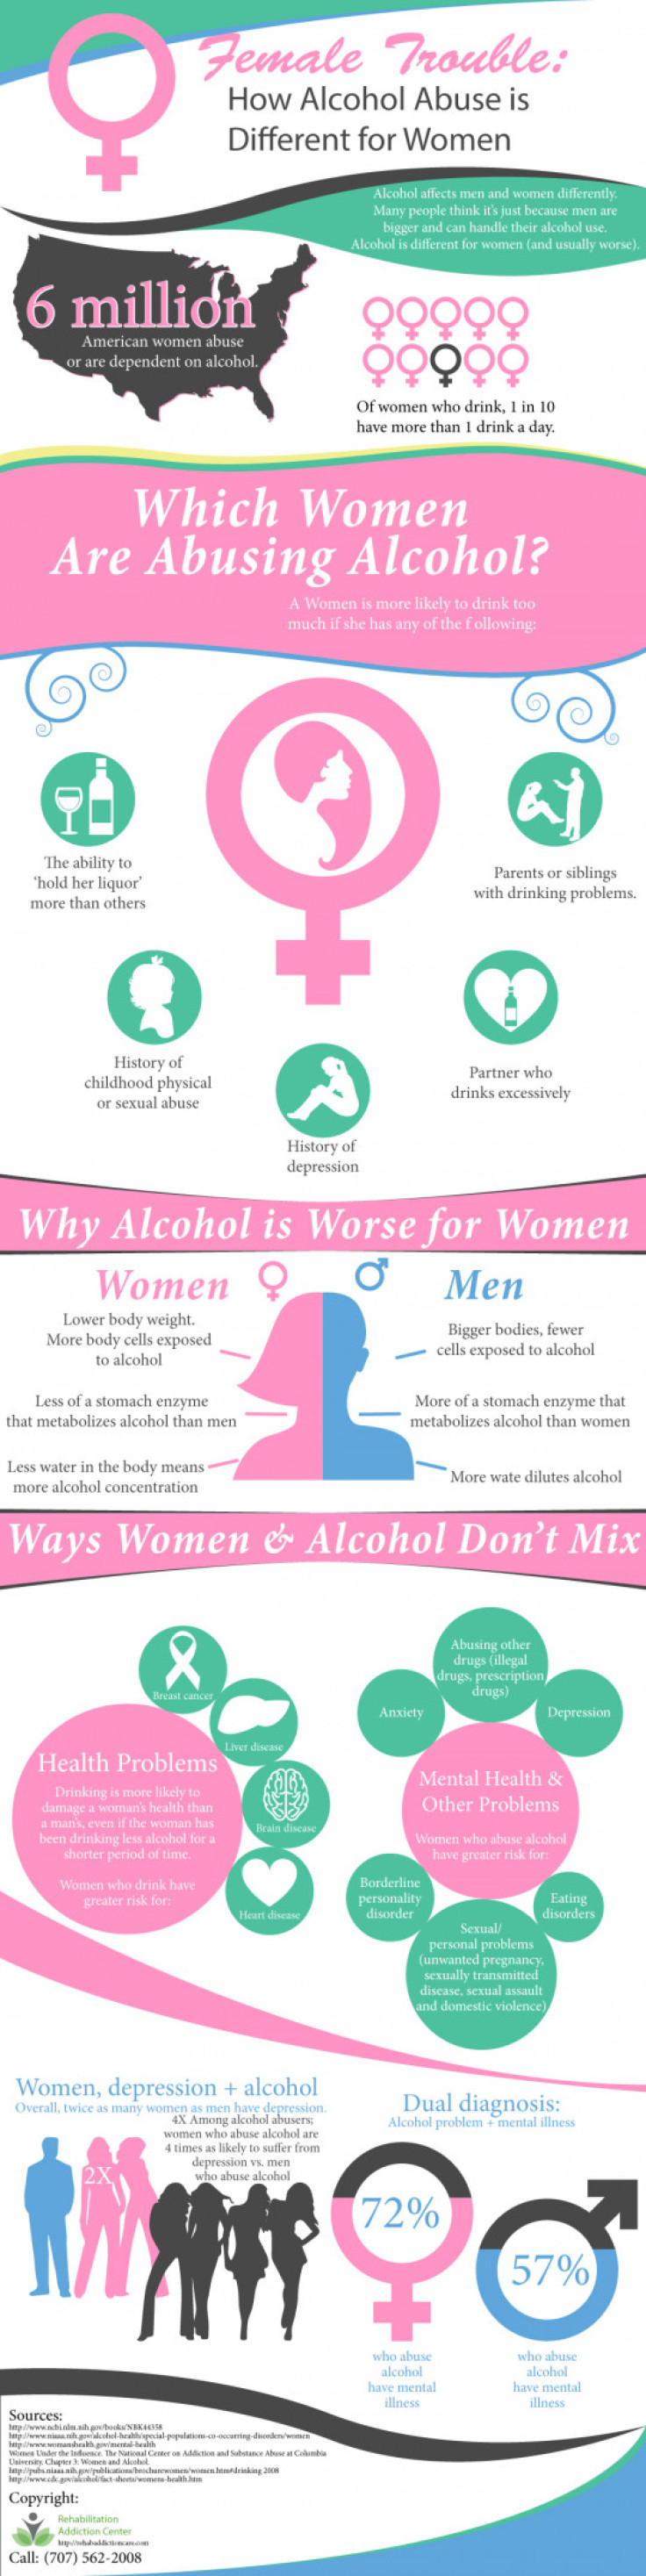 How Alcohol Abuse is Different for Women | Rehabilitation Addiction Center